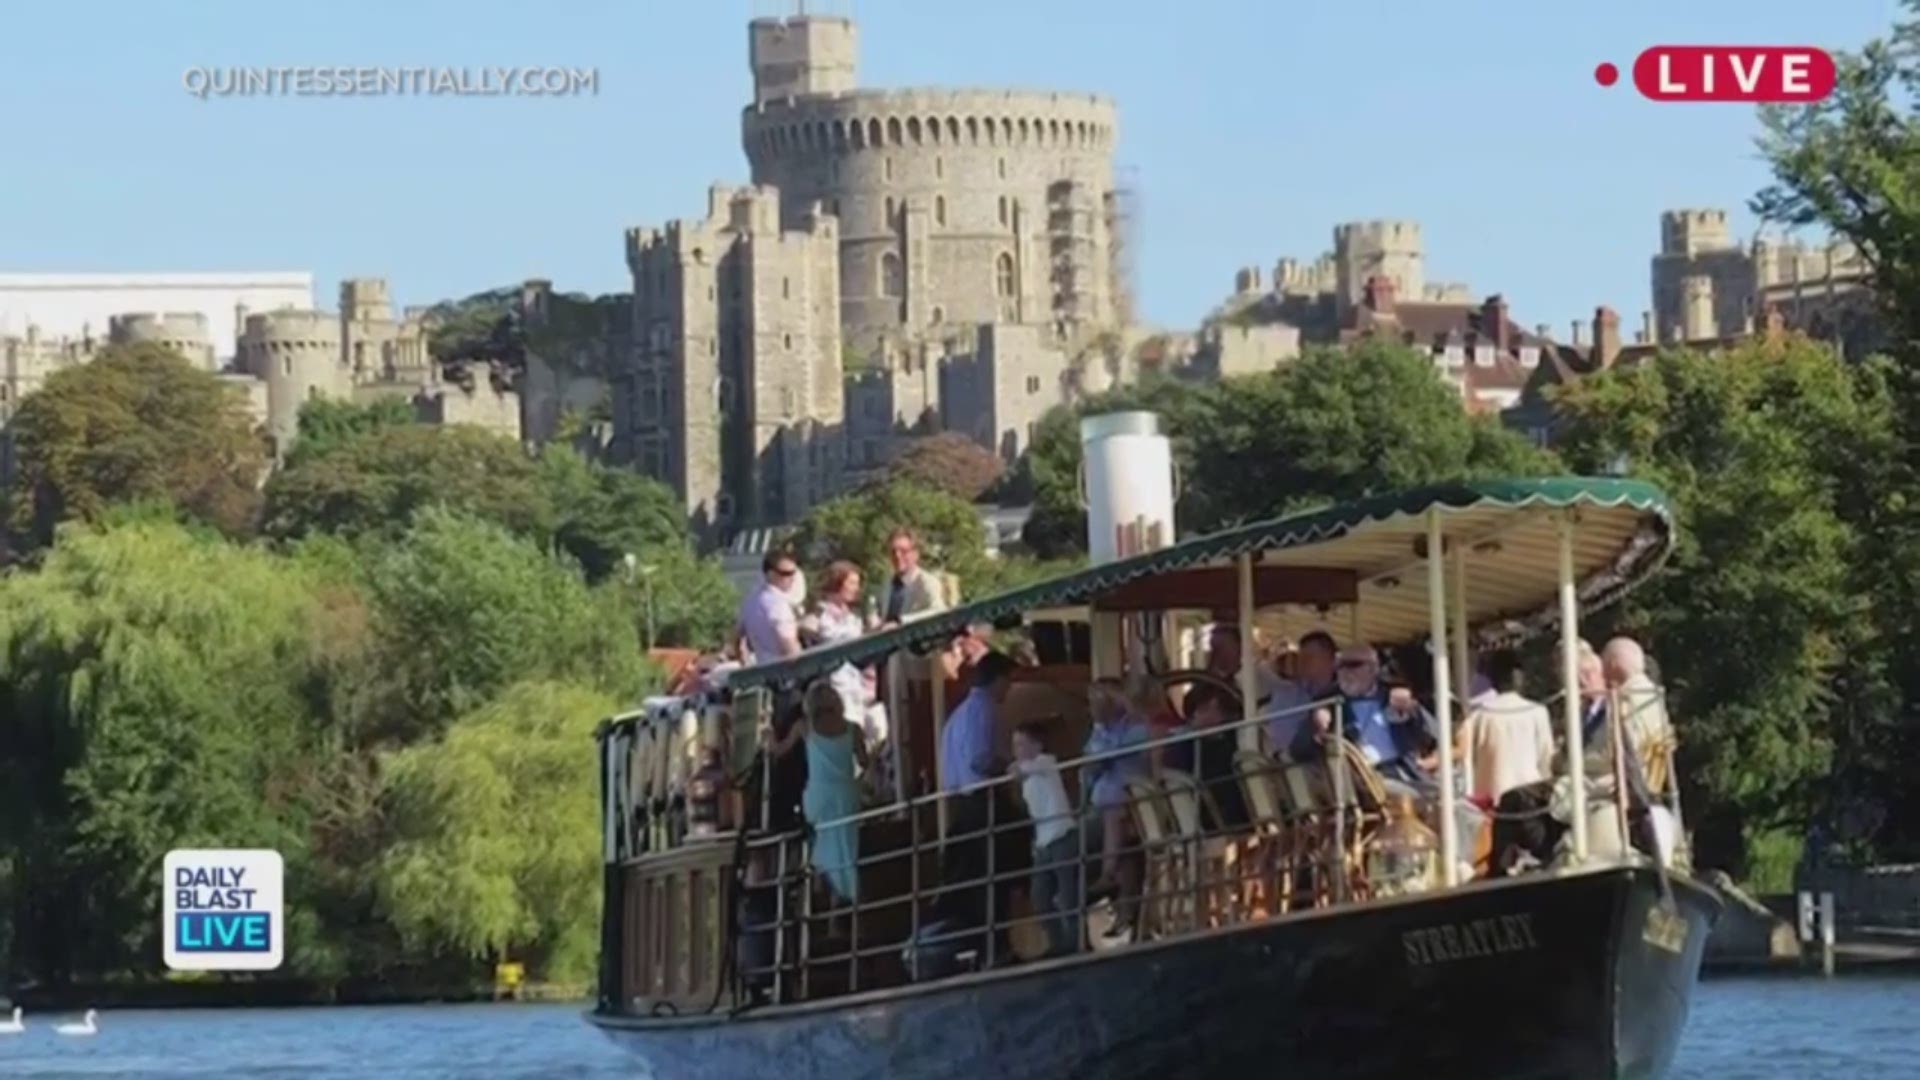 Didn't get an invite to the royal wedding? Let that wash away on a booze cruise! The British Concierge Company "Quintessentially" is offering one lucky person, and their 50 closest friends, the opportunity to celebrate on the sea. The steamboat will offer